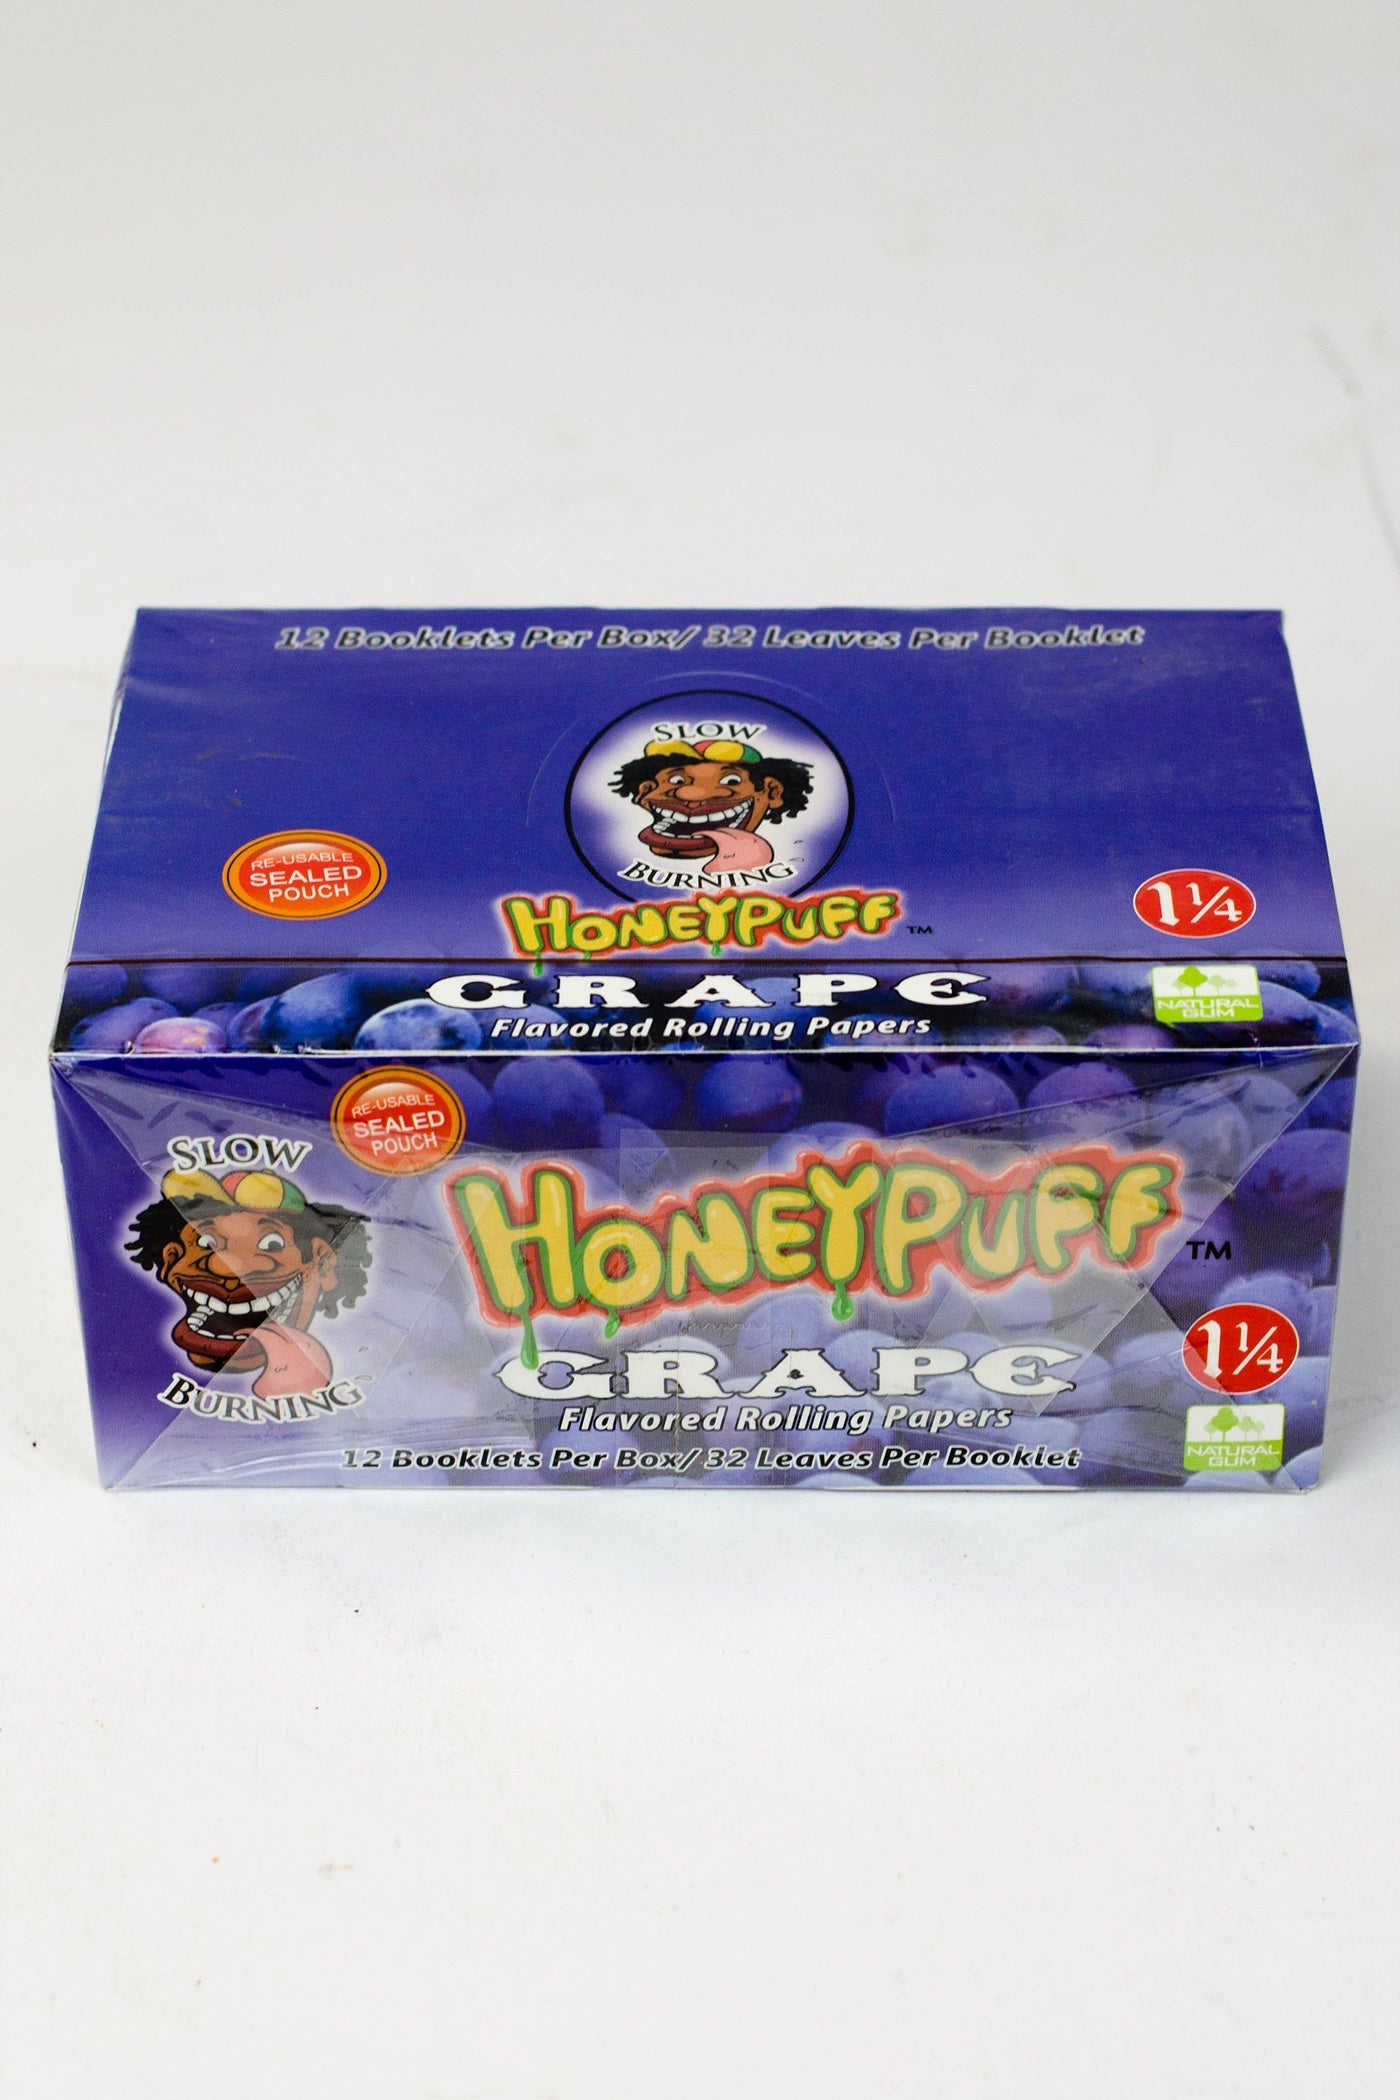 HONEYPUFF 1 1/4 FRUIT FLAVORED ROLLING PAPERS_6